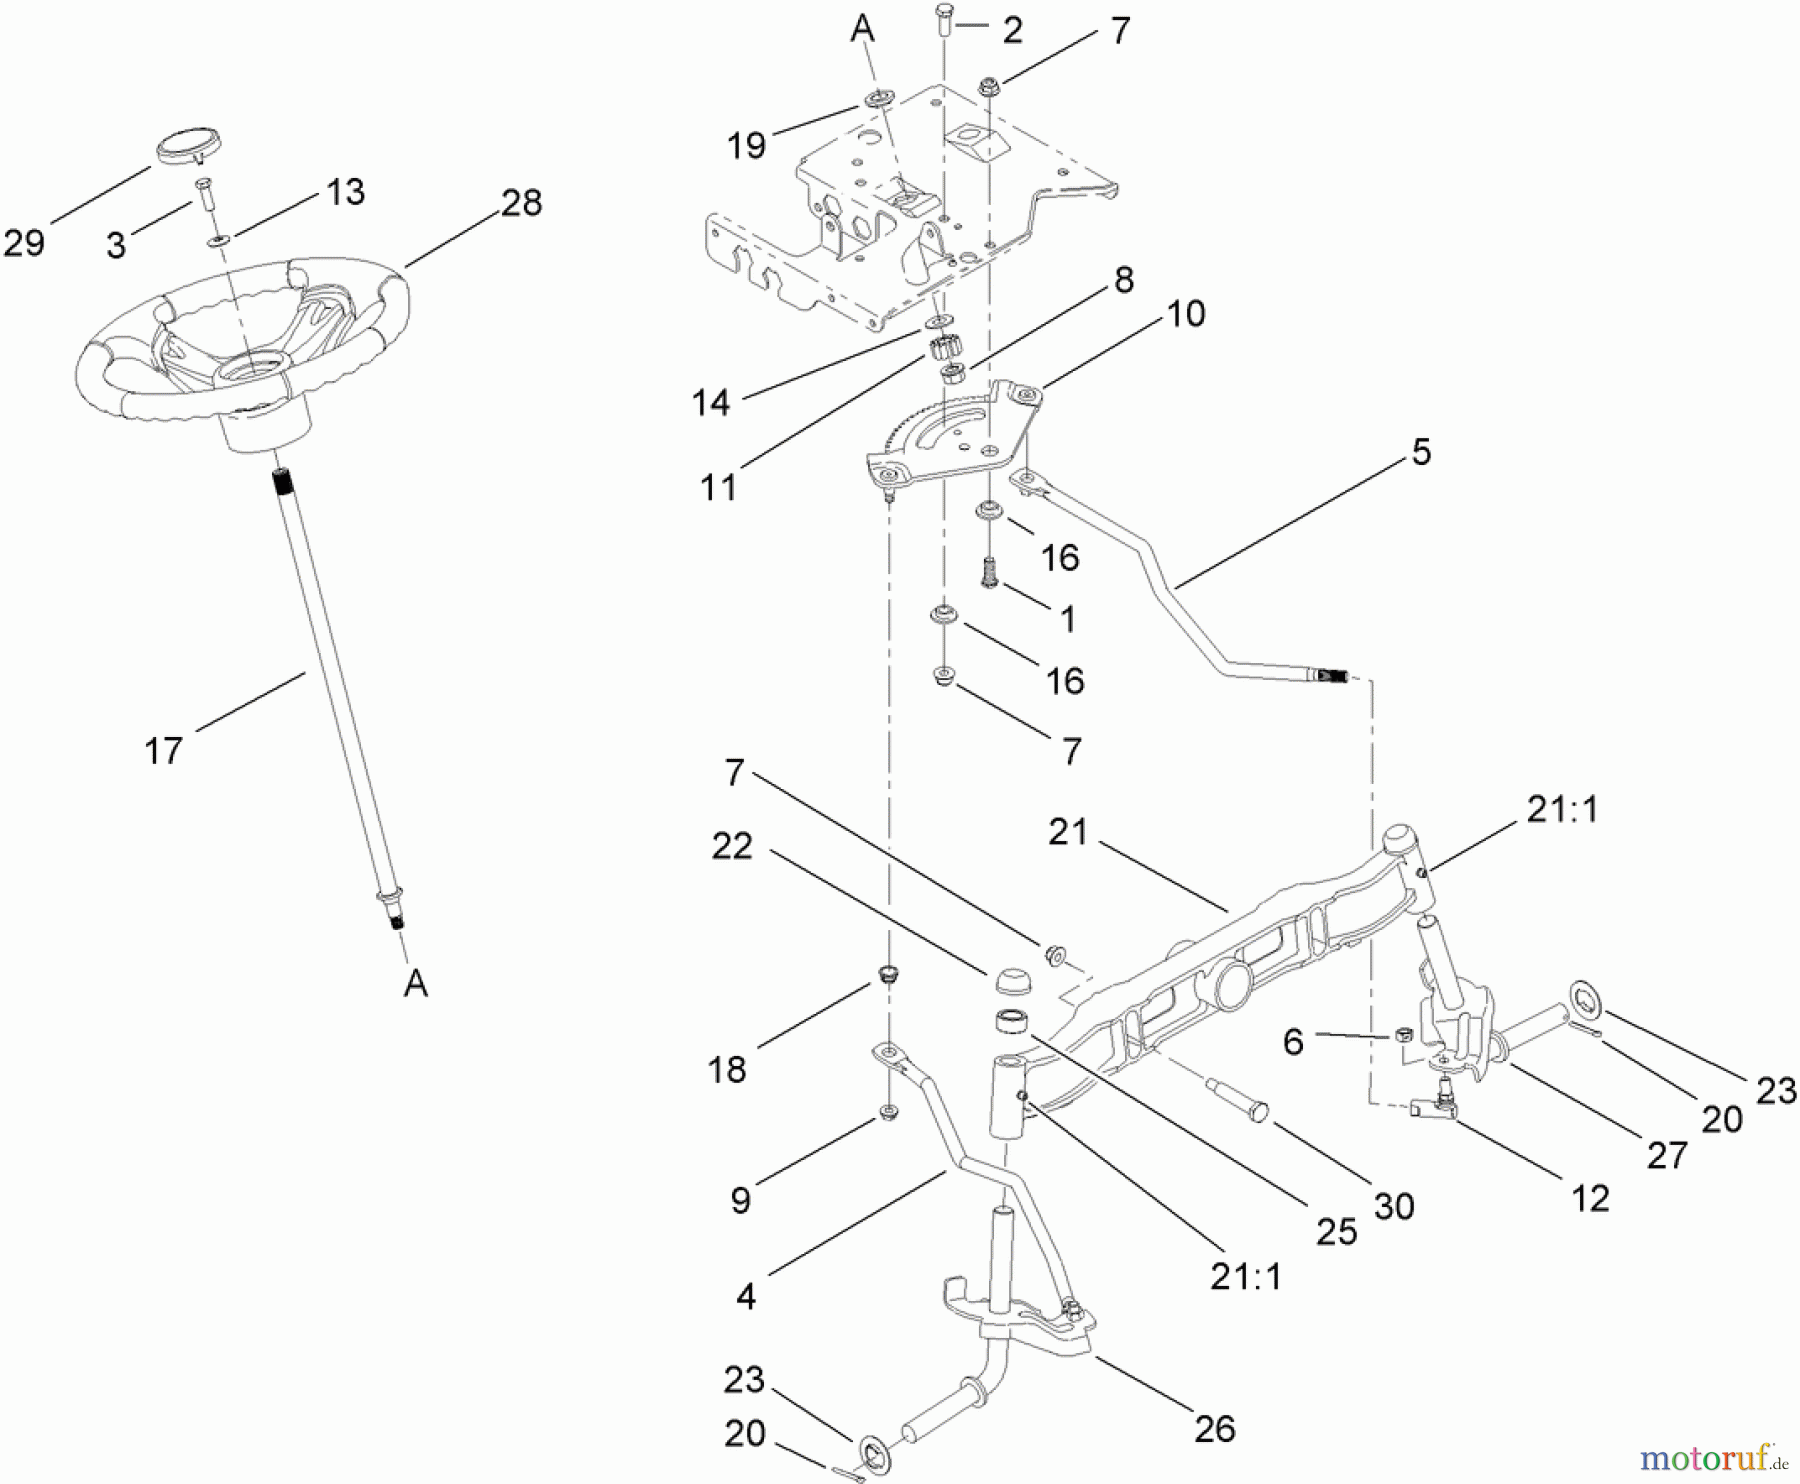  Toro Neu Mowers, Lawn & Garden Tractor Seite 1 13AL60RG044 (LX426) - Toro LX426 Lawn Tractor, 2008 (SN 1L107H10100 -) STEERING SHAFT AND FRONT AXLE ASSEMBLY